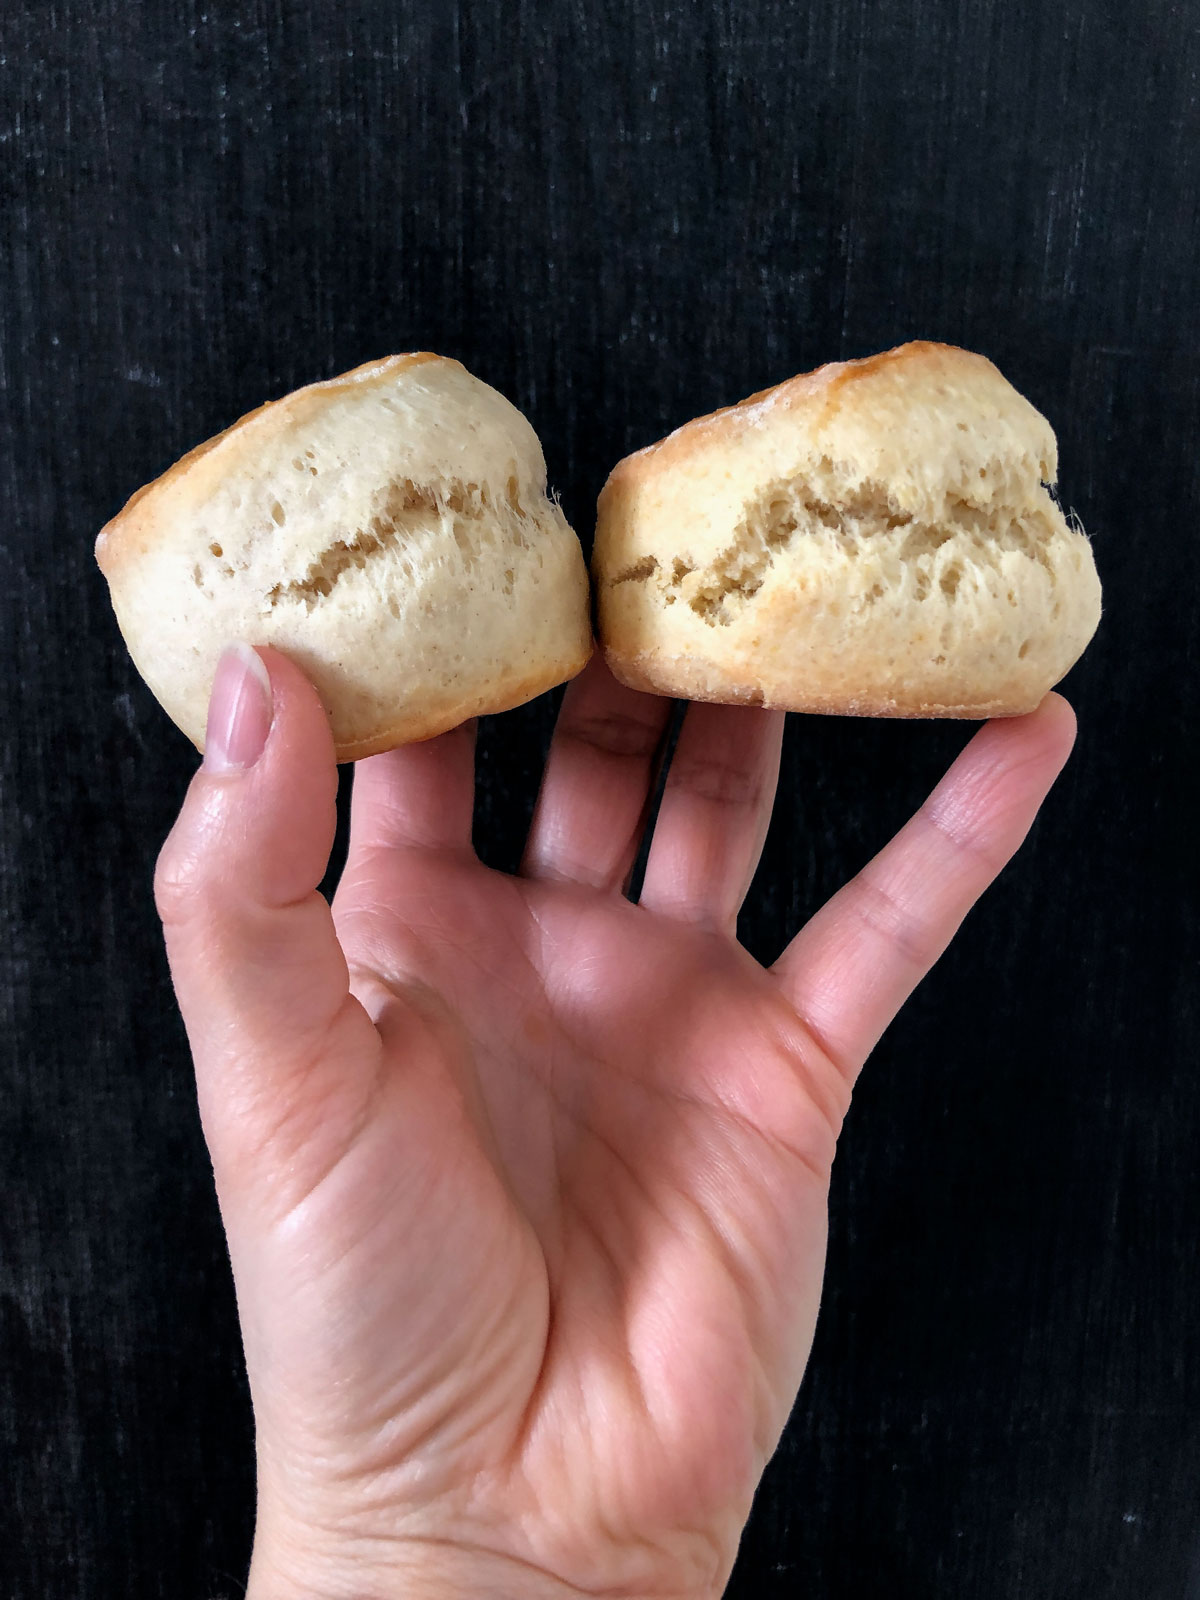 A hand holding two scones against black background.